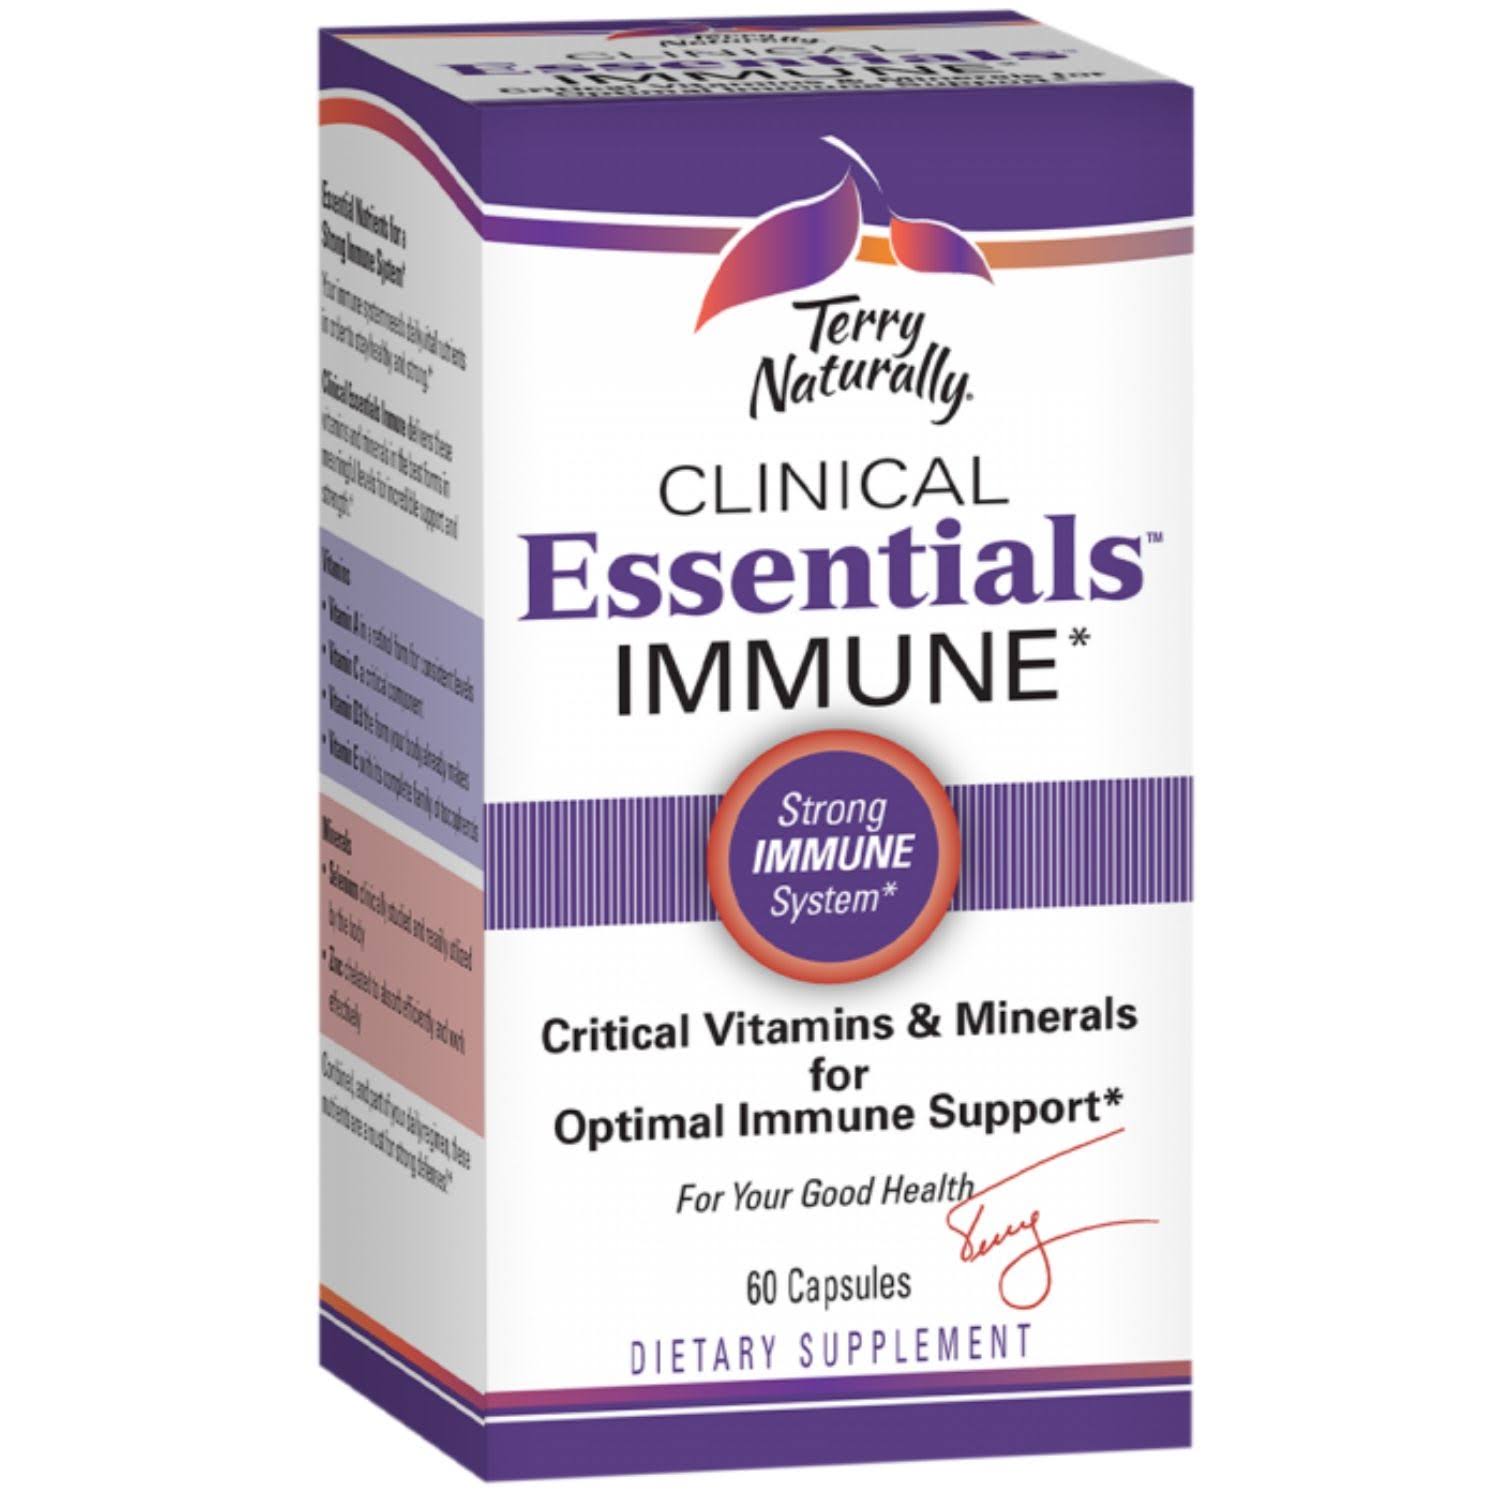 Terry Naturally Clinical Essentials Immune, 60 Capsules - 60 Servings